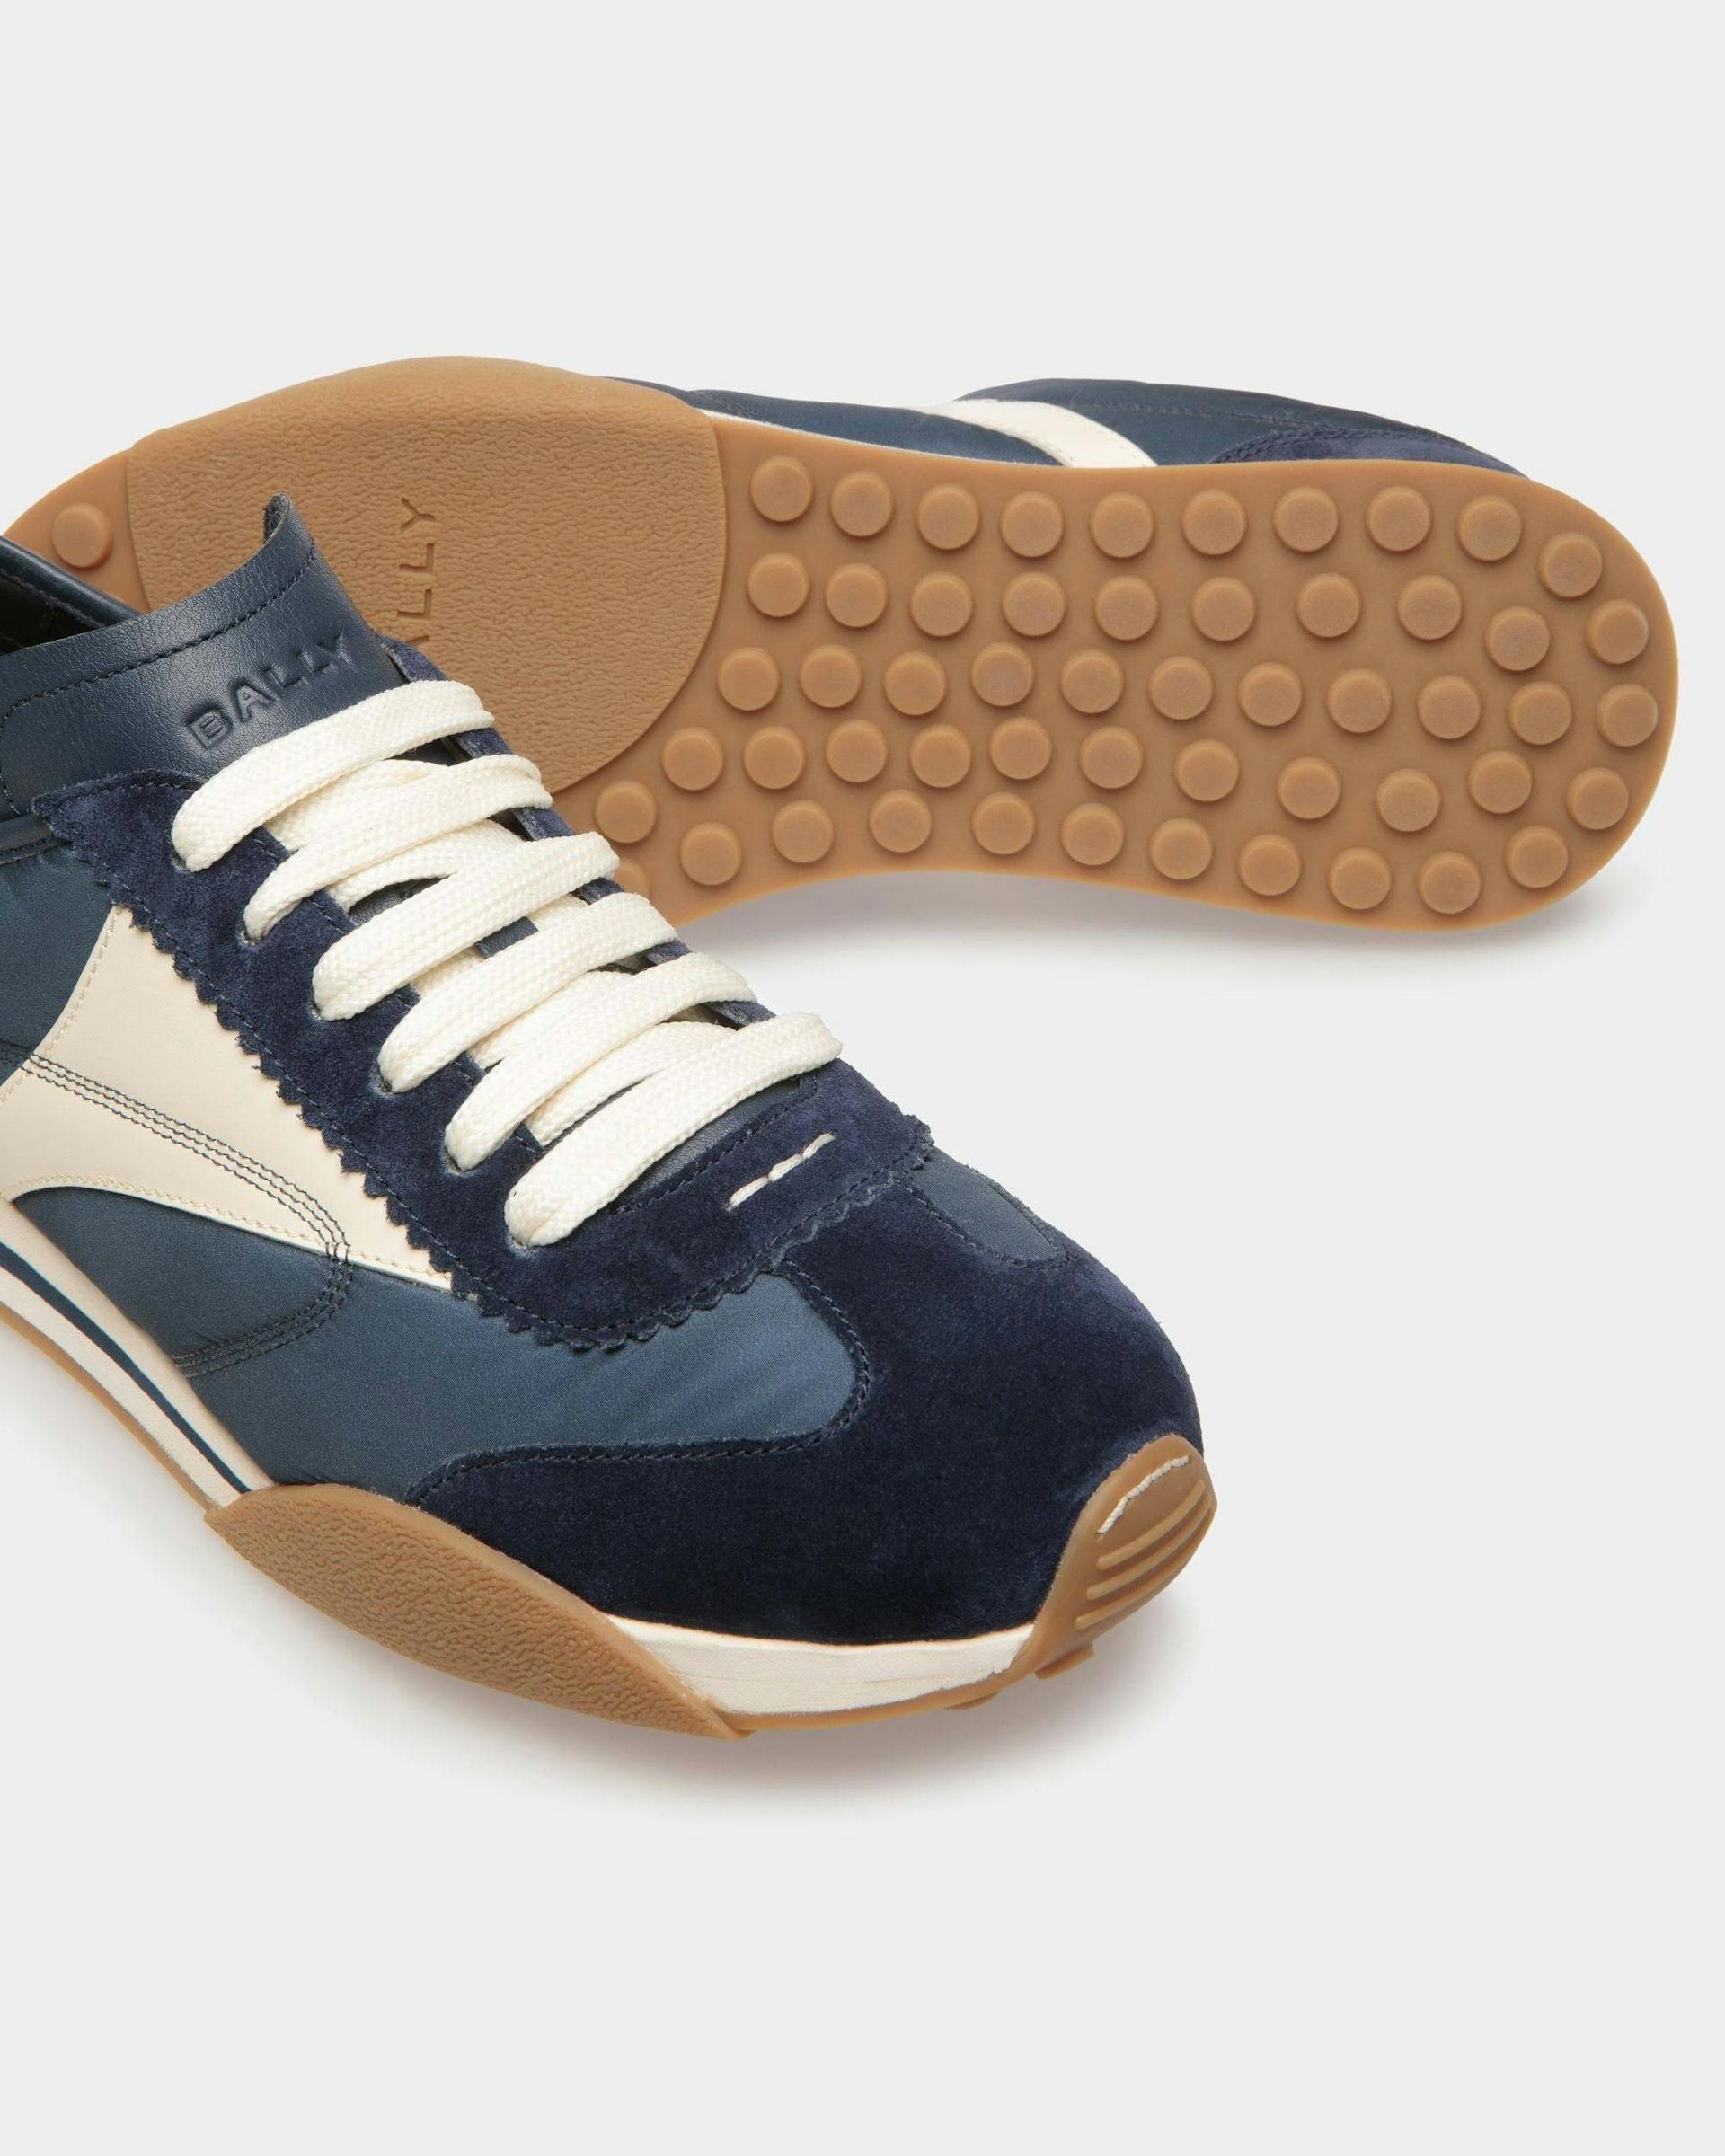 Sussex Sneakers In Marine And Bone Leather And Fabric - Men's - Bally - 04